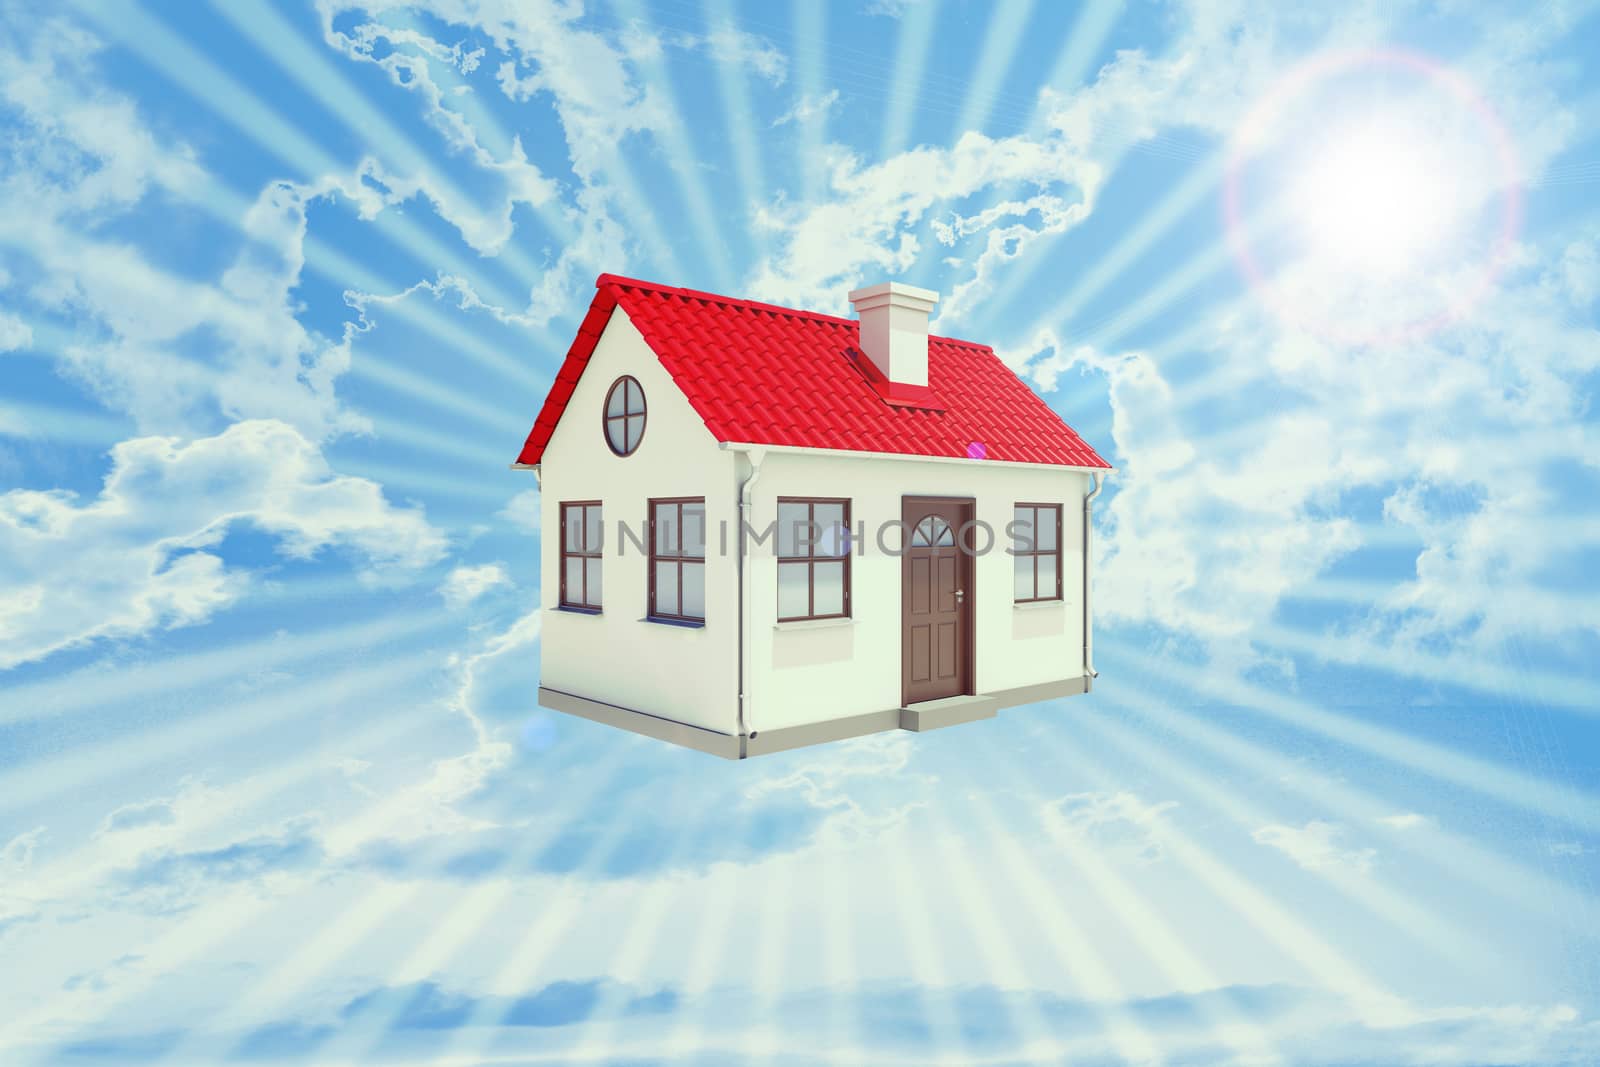 House on blue sky background with stripes